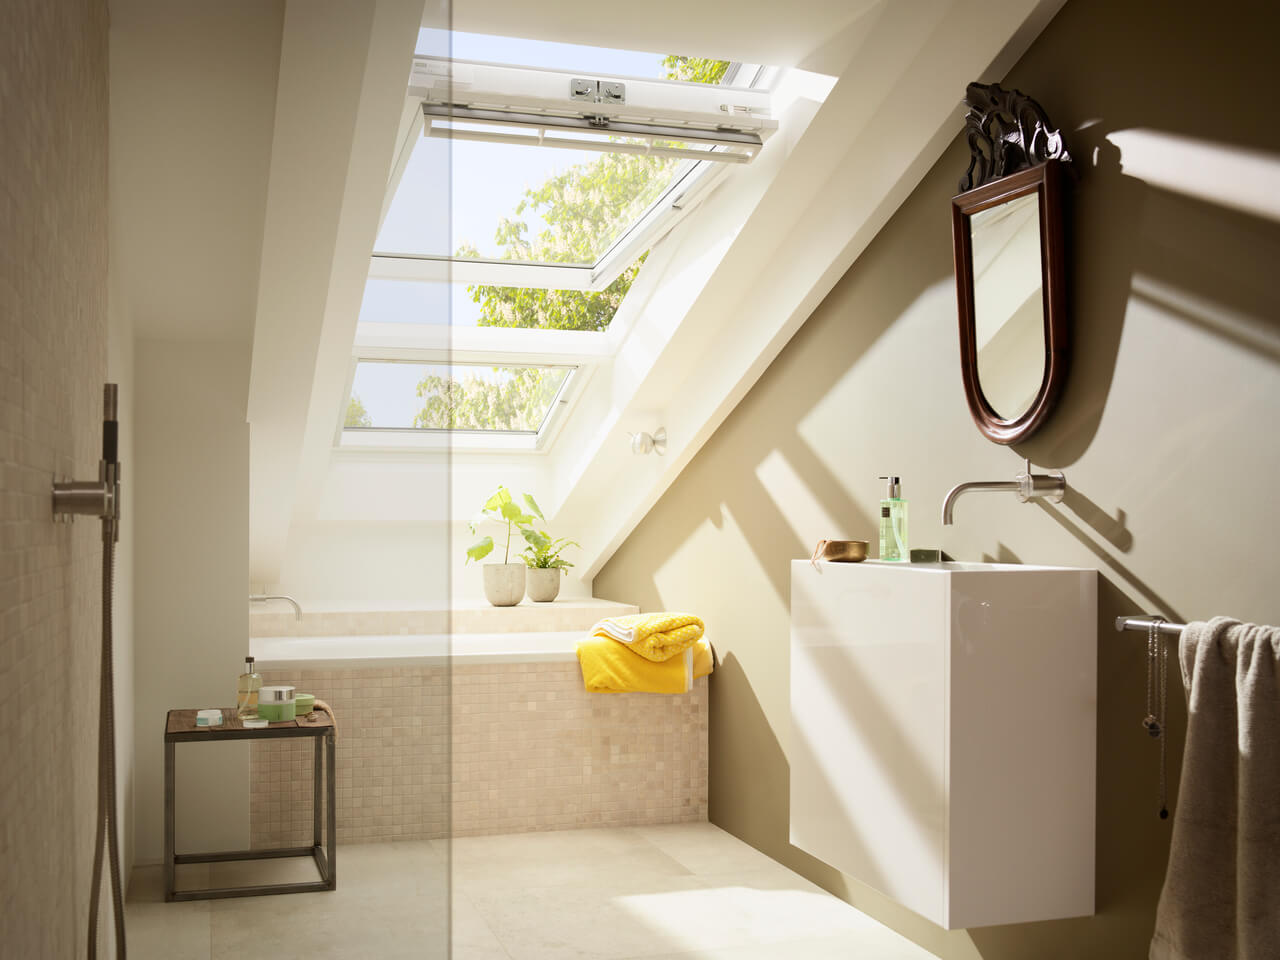 Sunny bathroom with an open roof window